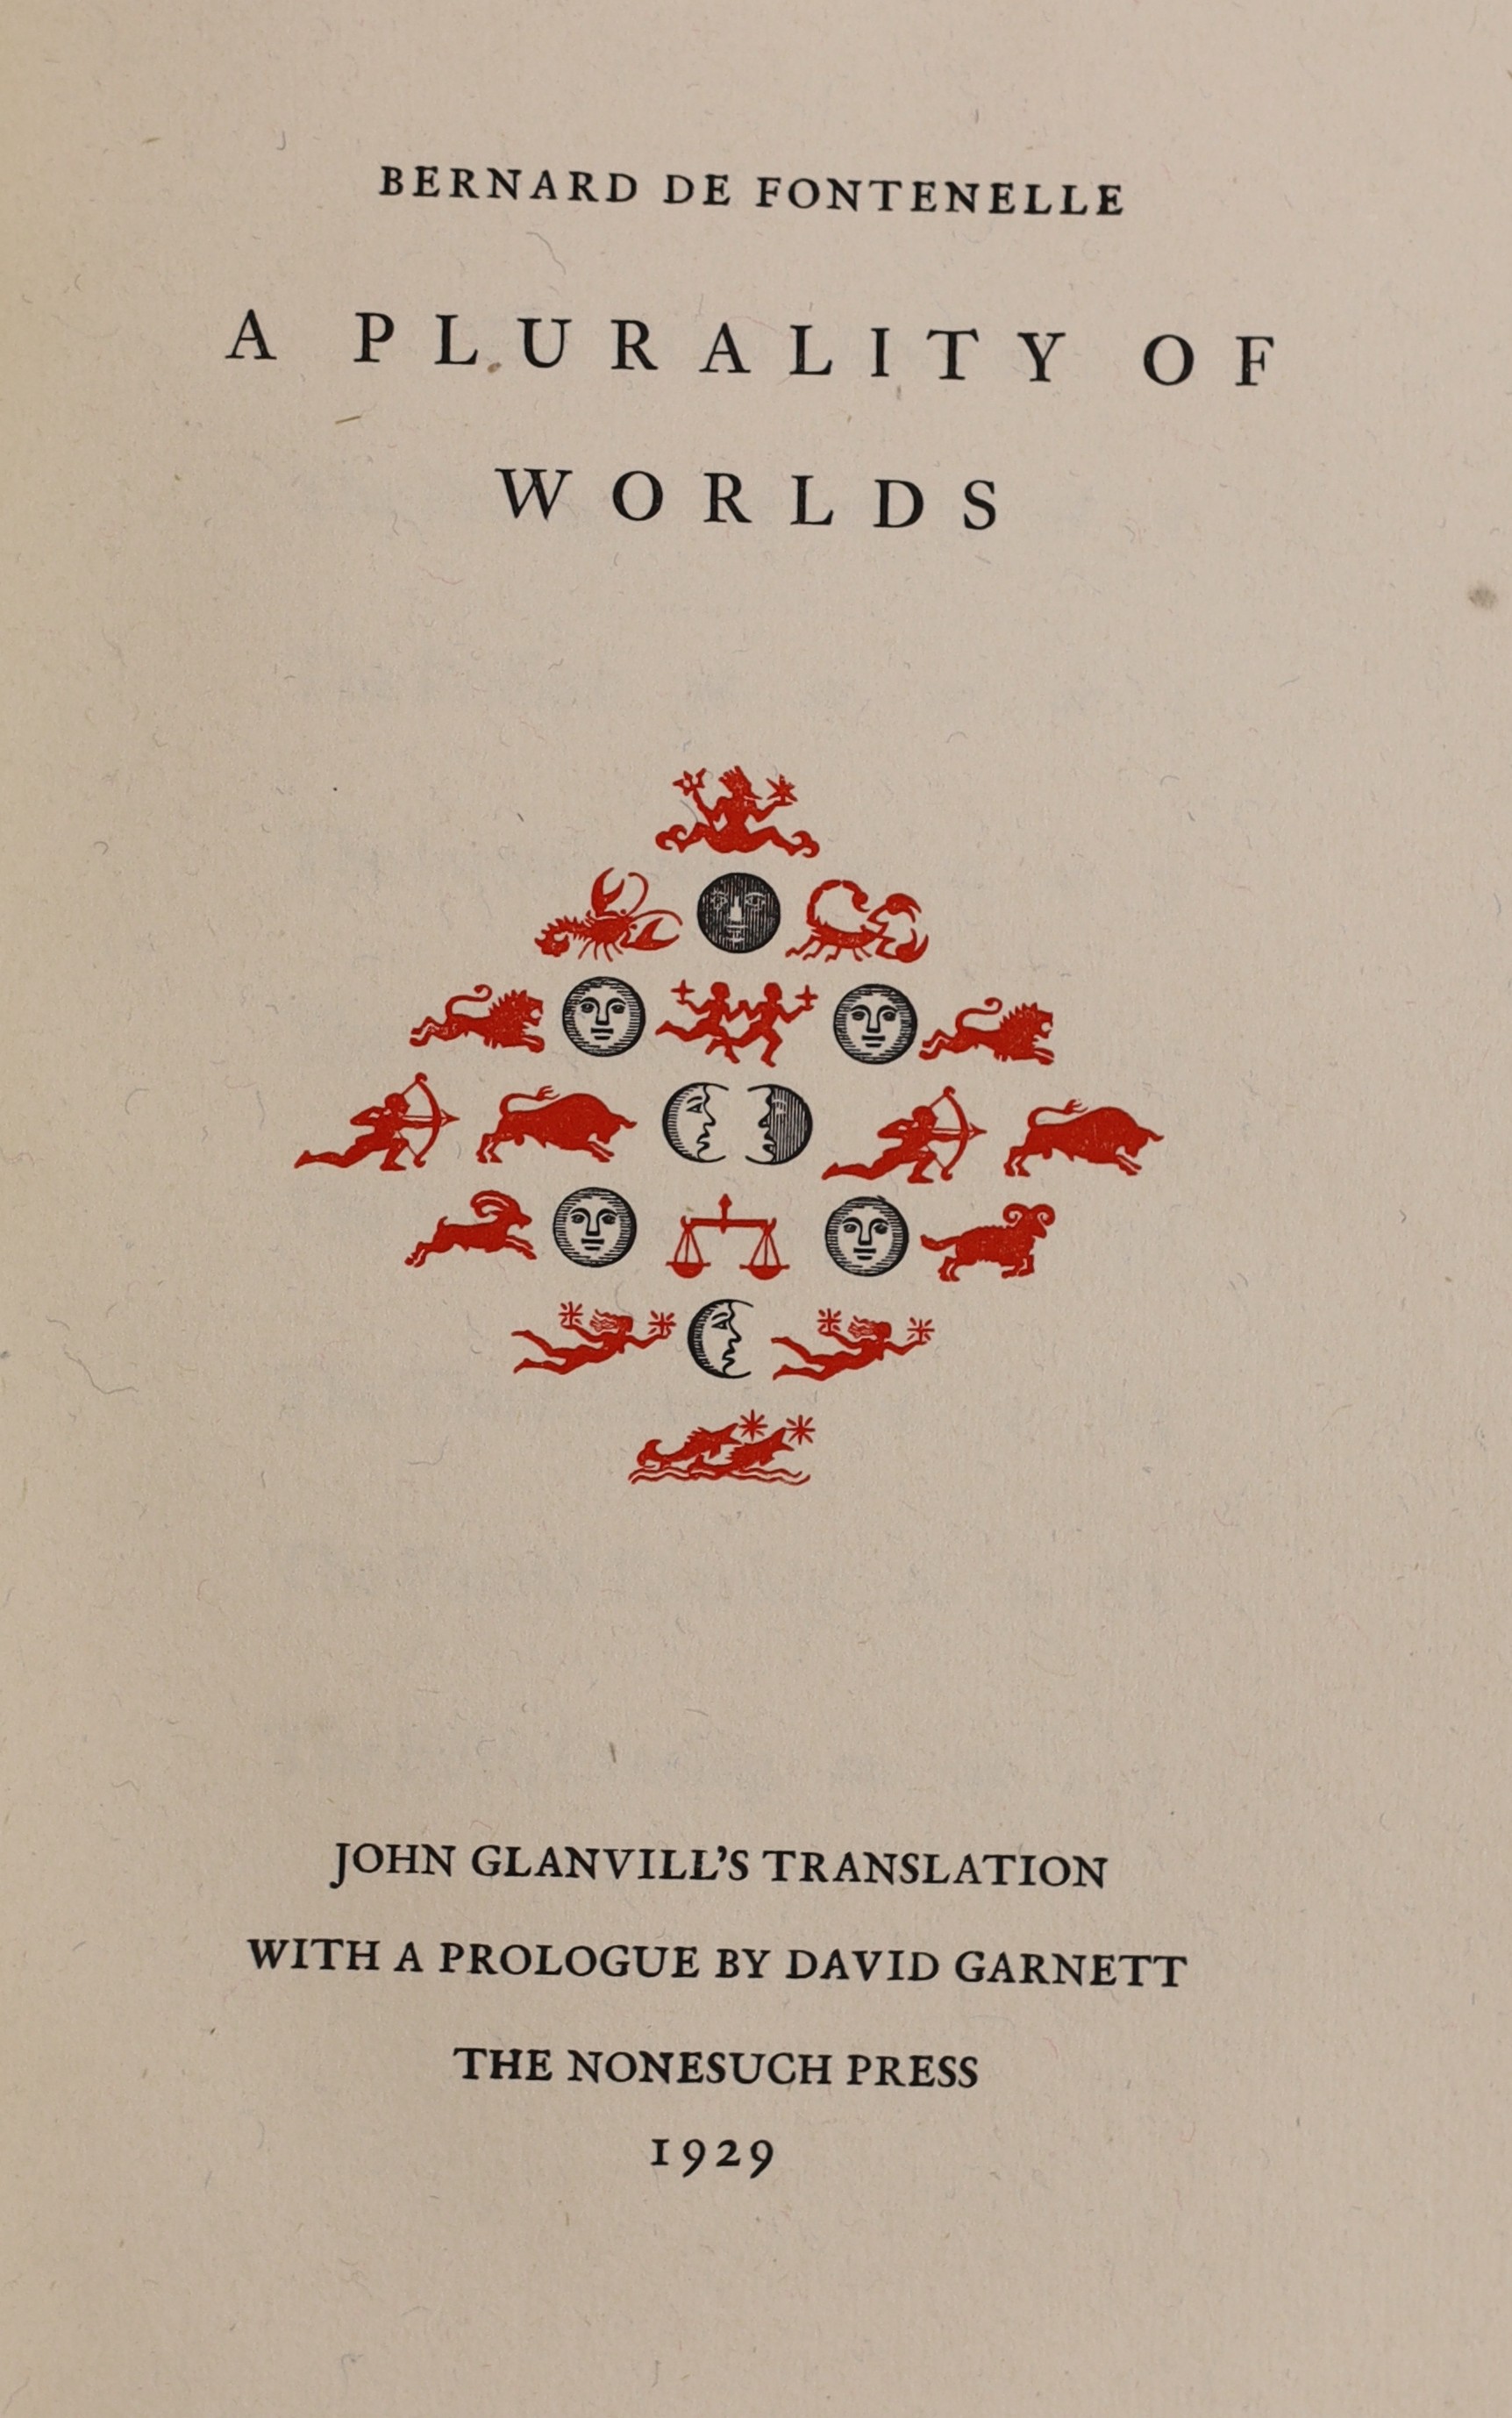 Nonesuch Press - 2 works - Fontelle, Bernard de - A Plurality of Worlds - John Glanvill’s Translation, one of 1600, 8vo, original vellum, with gilt titles, London 1929, with slip case and Beedome, Thomas - Select Poems D